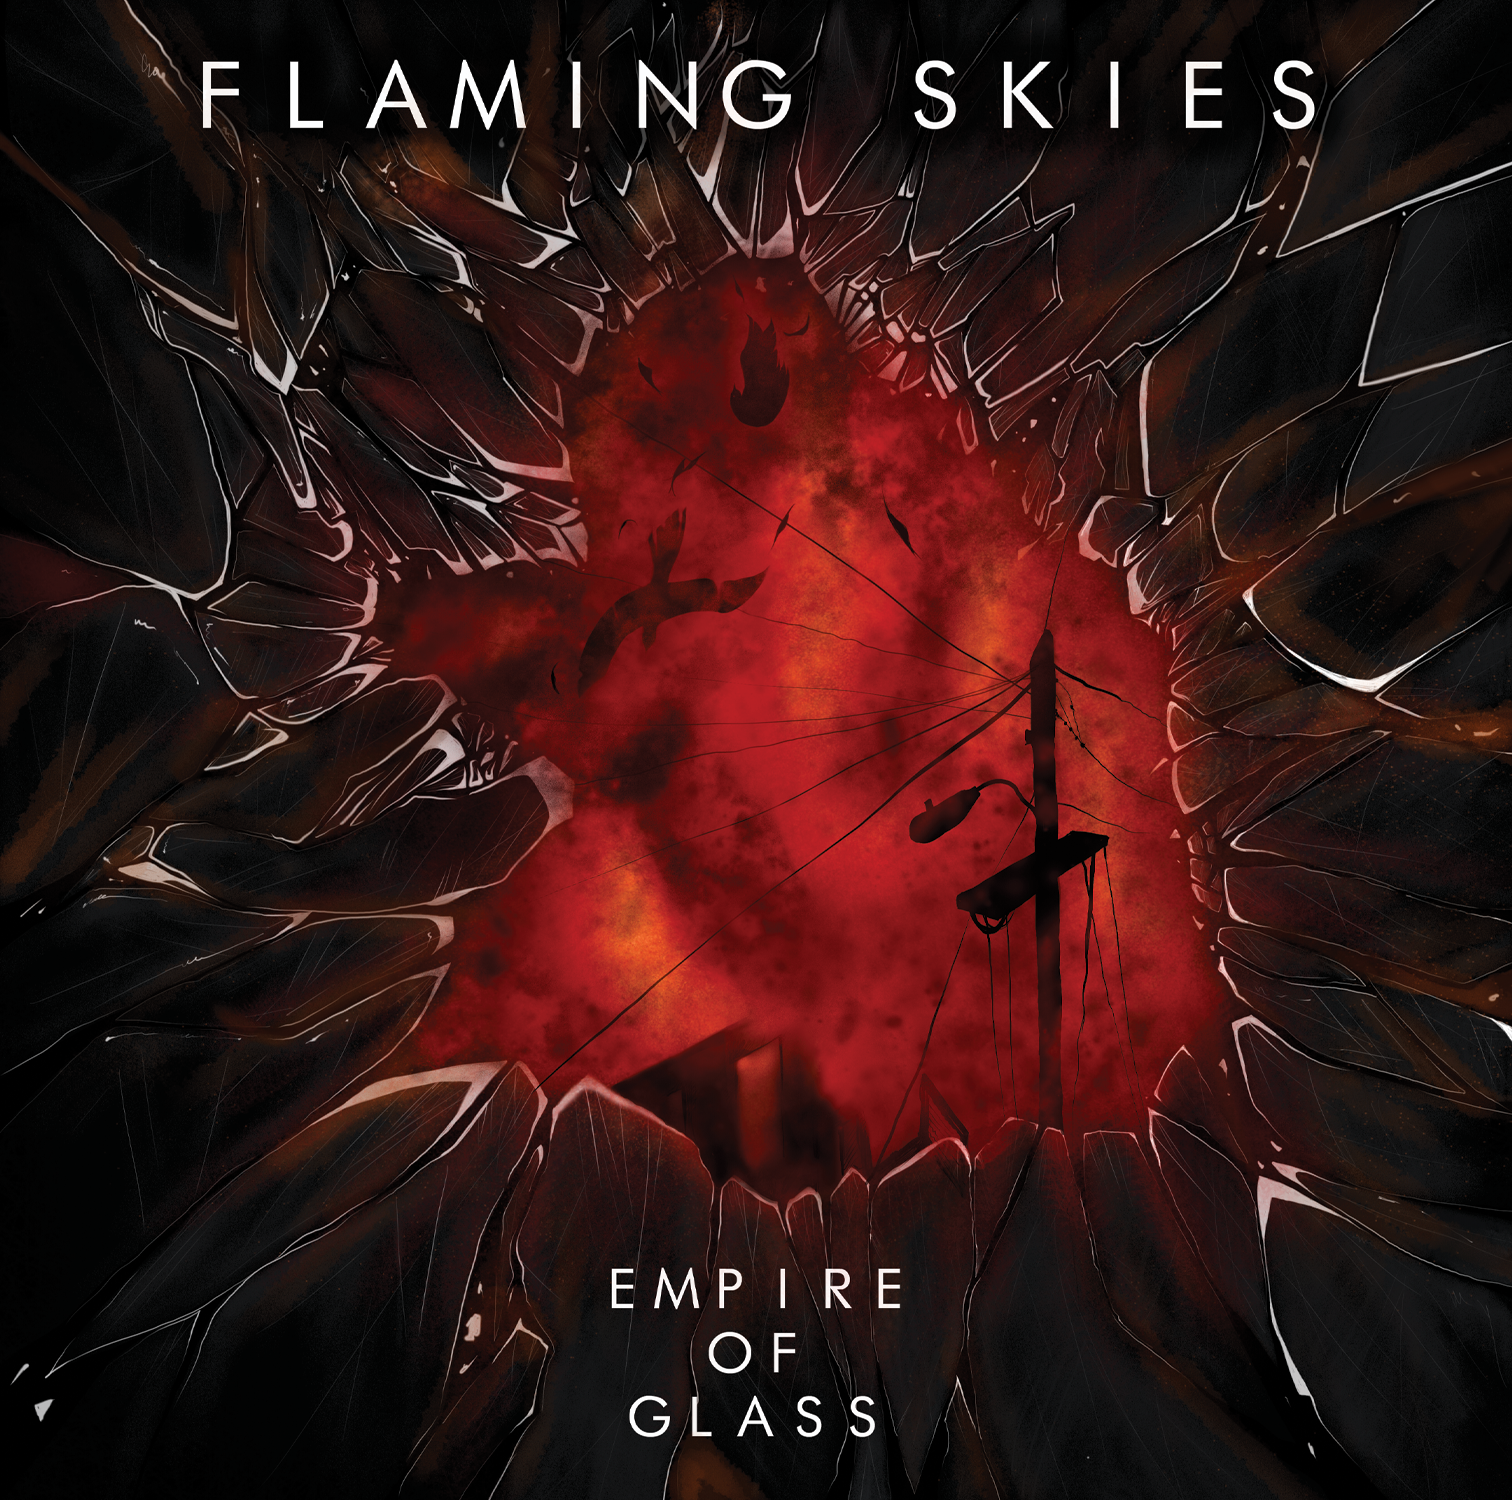 FLAMING SKIES - EMPIRE OF GLASS